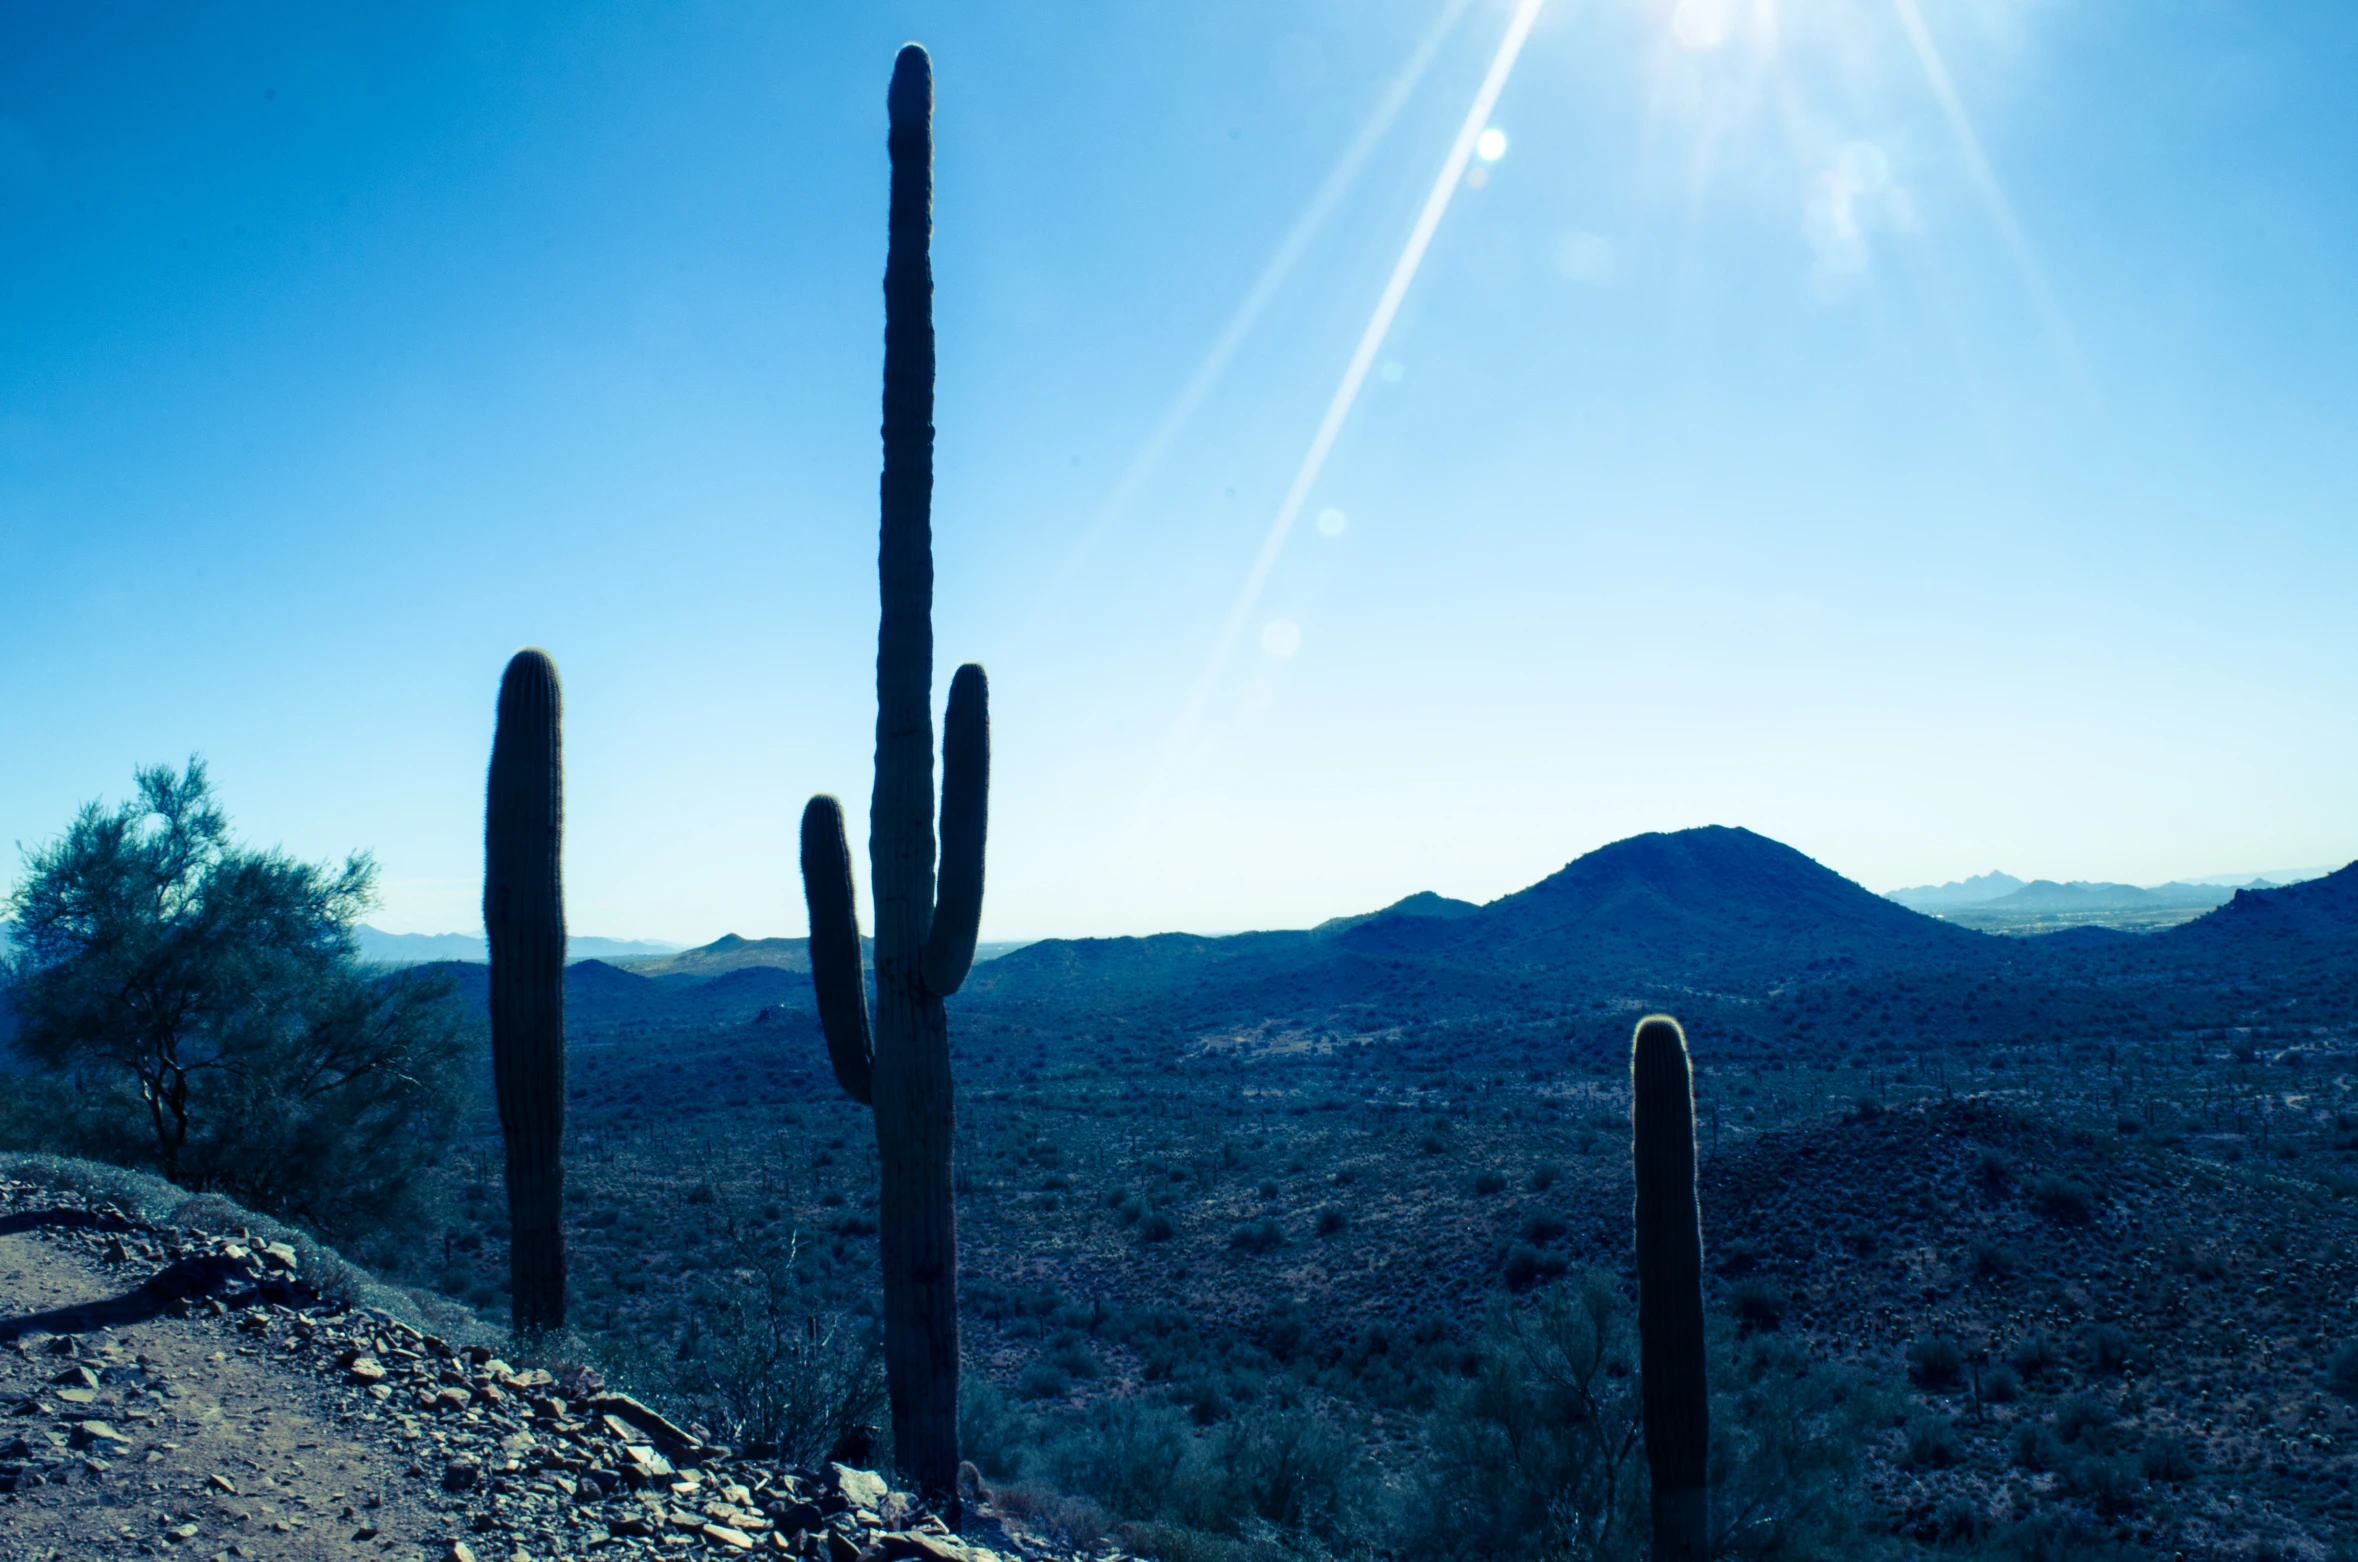 sun shines in between the tops of several cactus trees